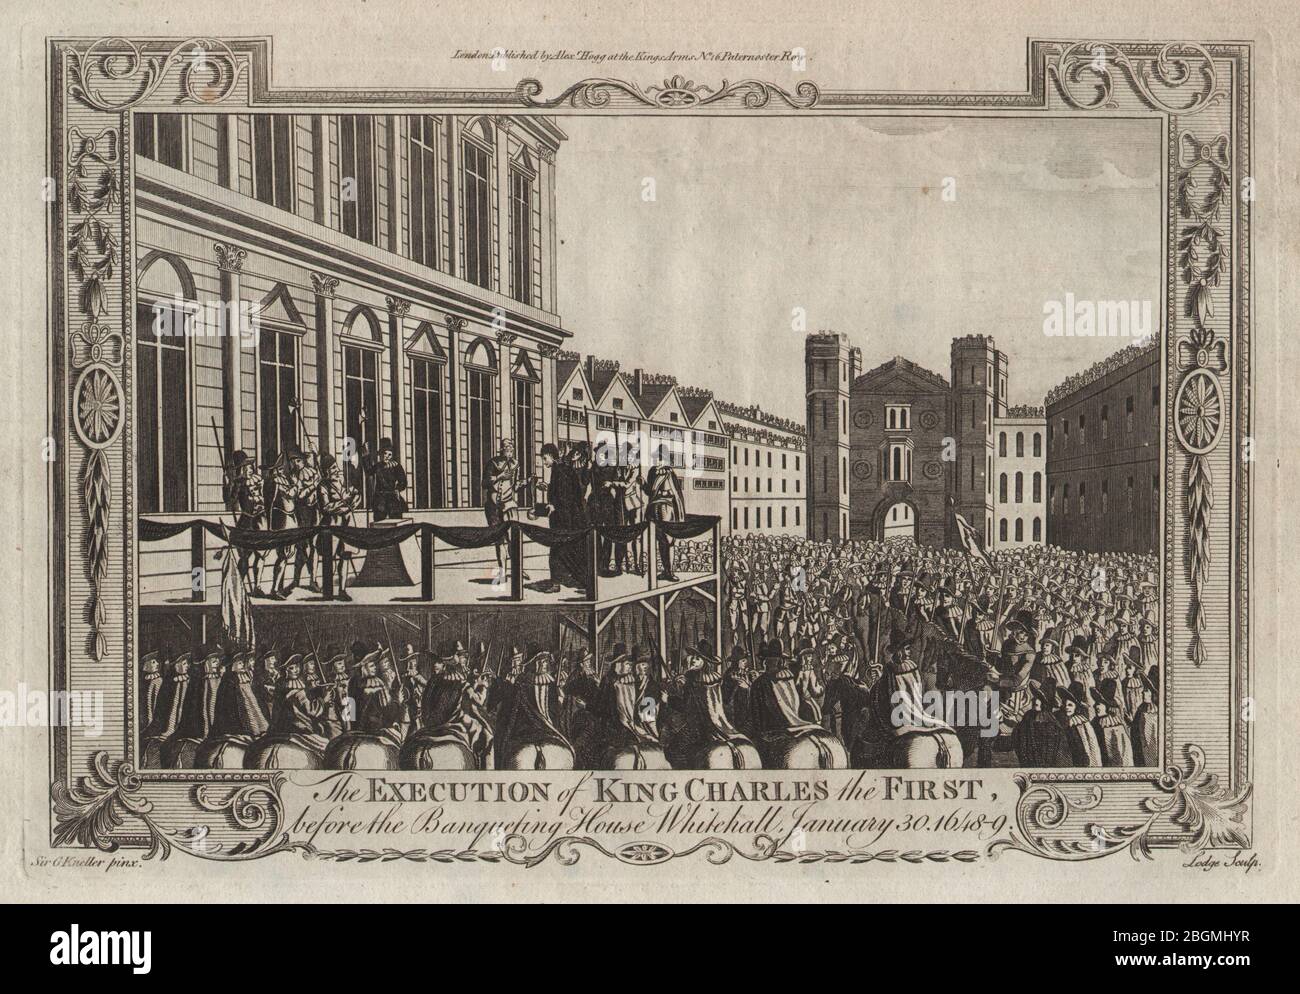 Execution of King Charles I, Banqueting House, Whitehall, 1649. THORNTON 1784 Stock Photo